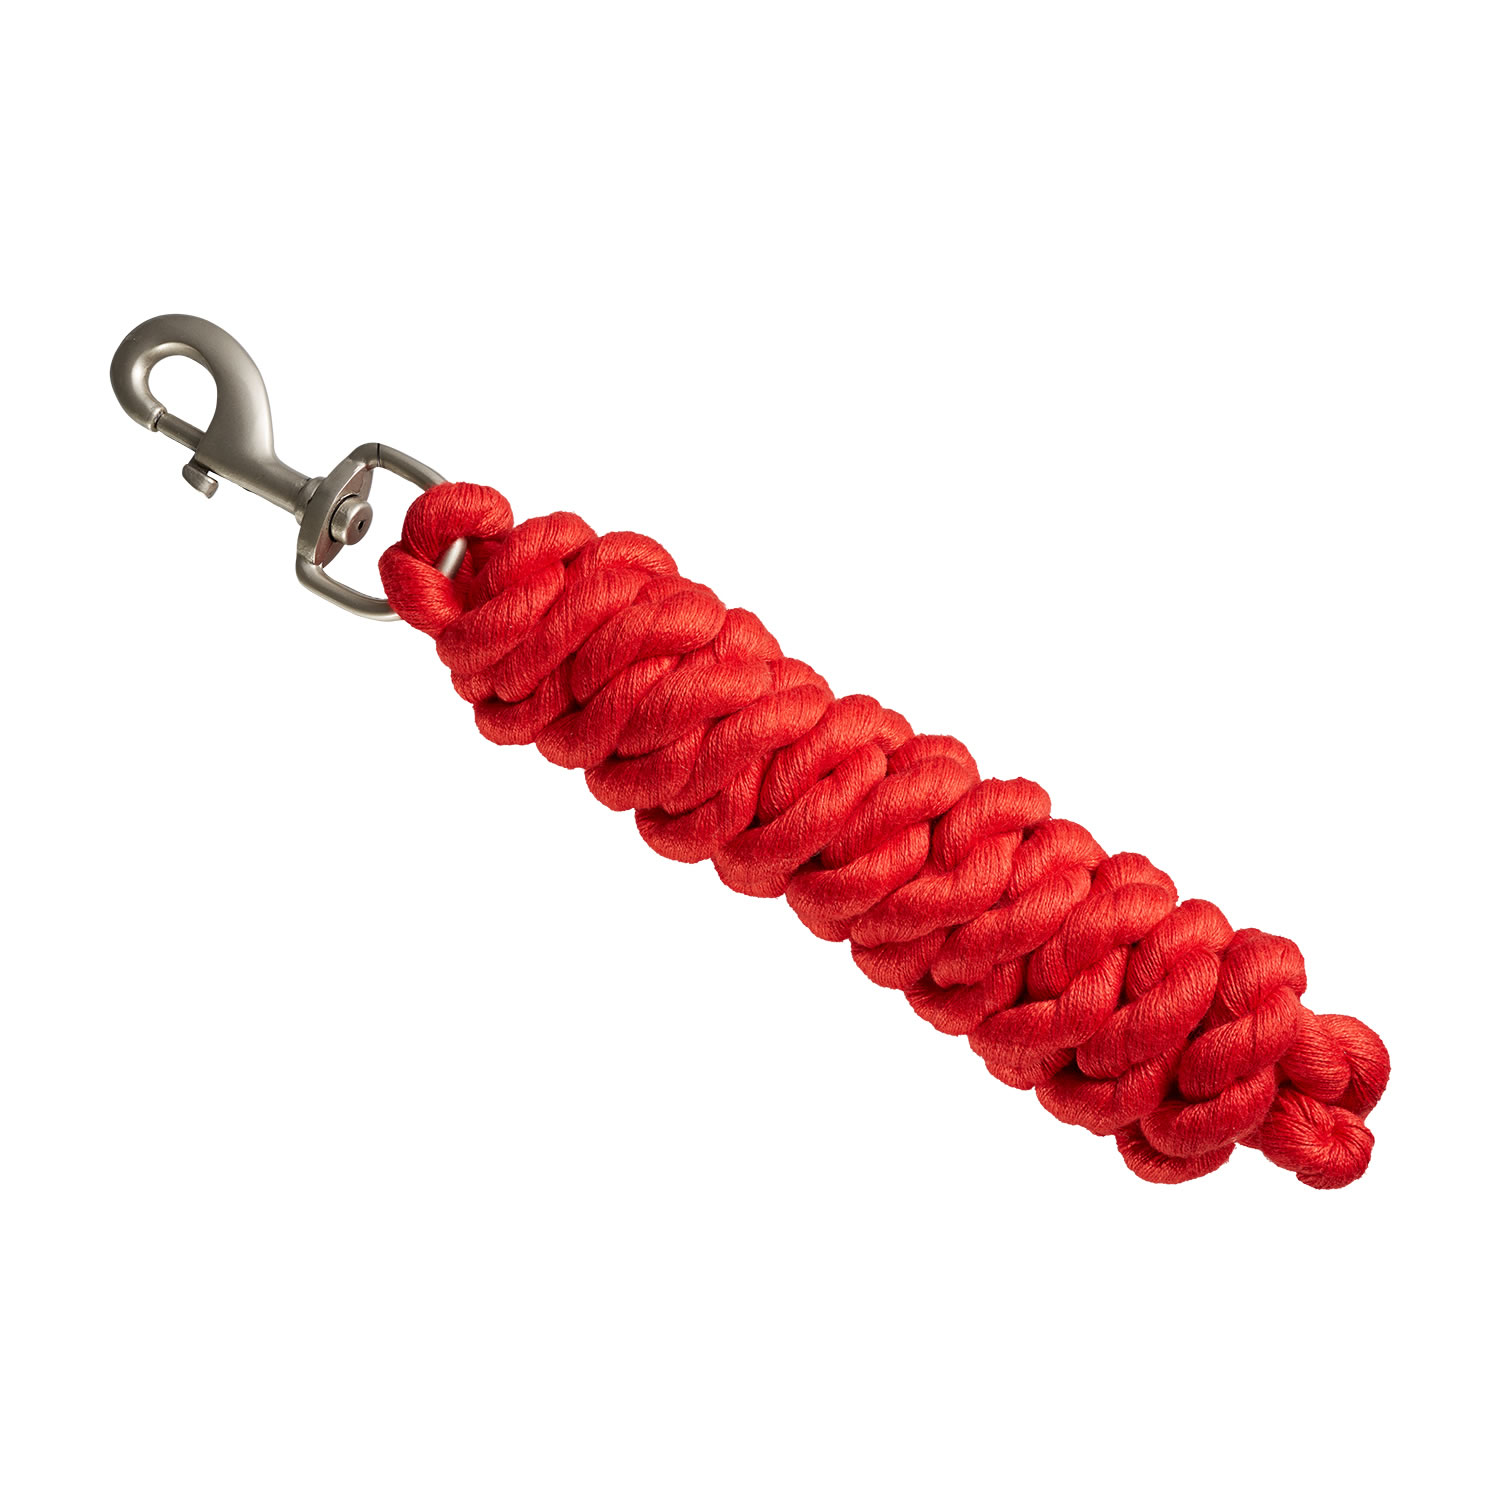 BITZ BASIC LEAD ROPE WITH TRIGGER CLIP RED